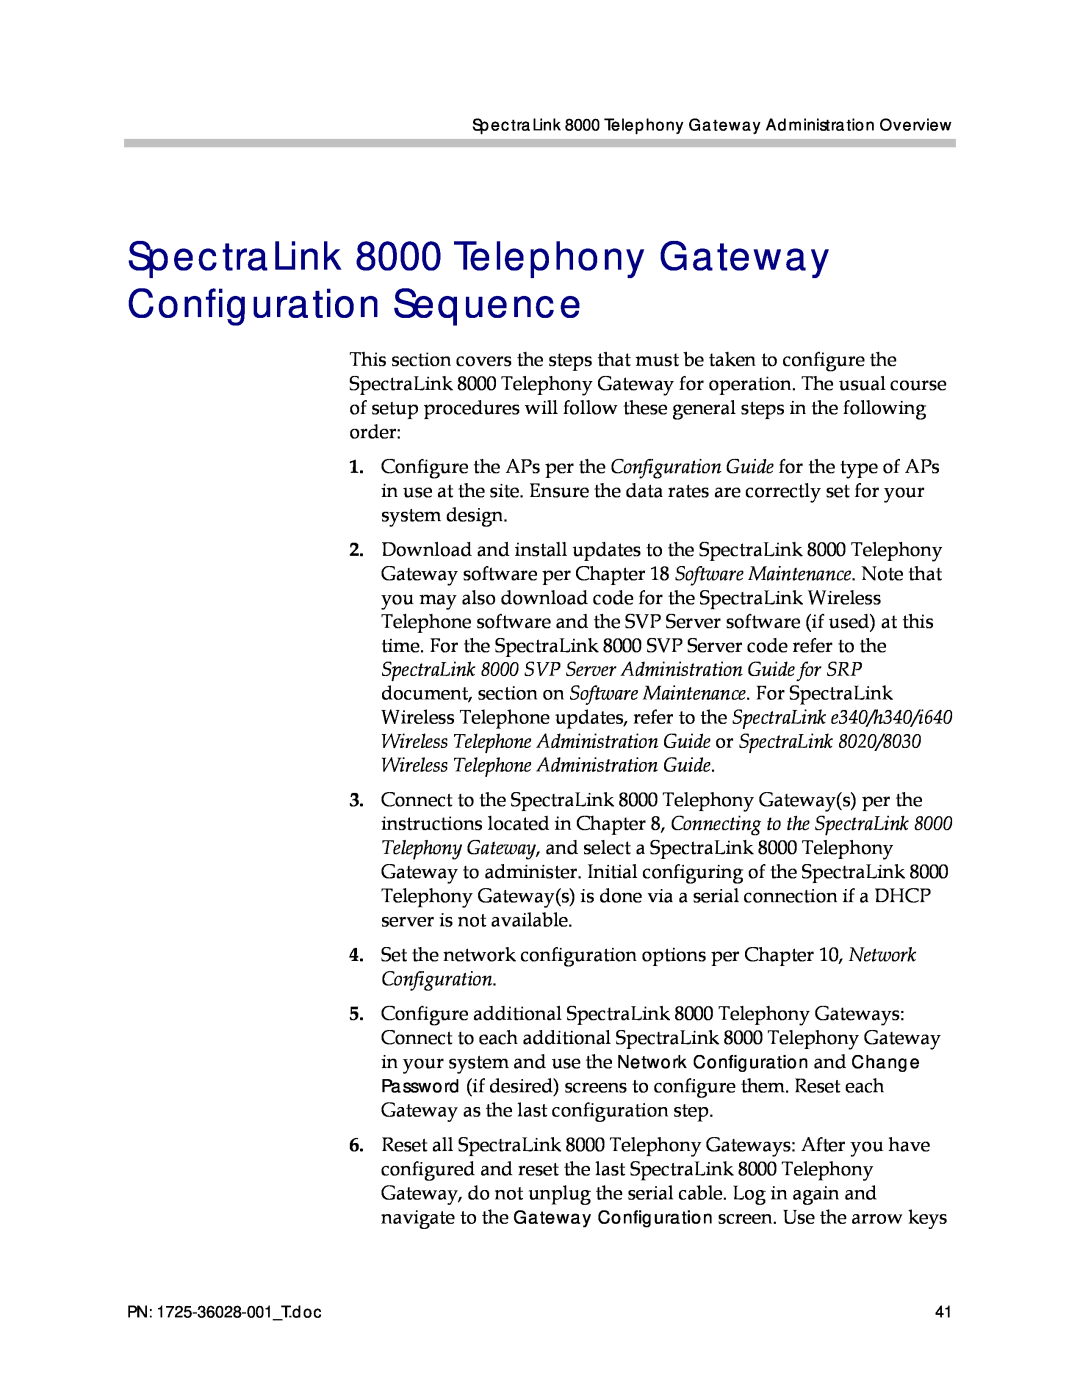 Polycom 1725-36028-001 manual SpectraLink 8000 Telephony Gateway Configuration Sequence 